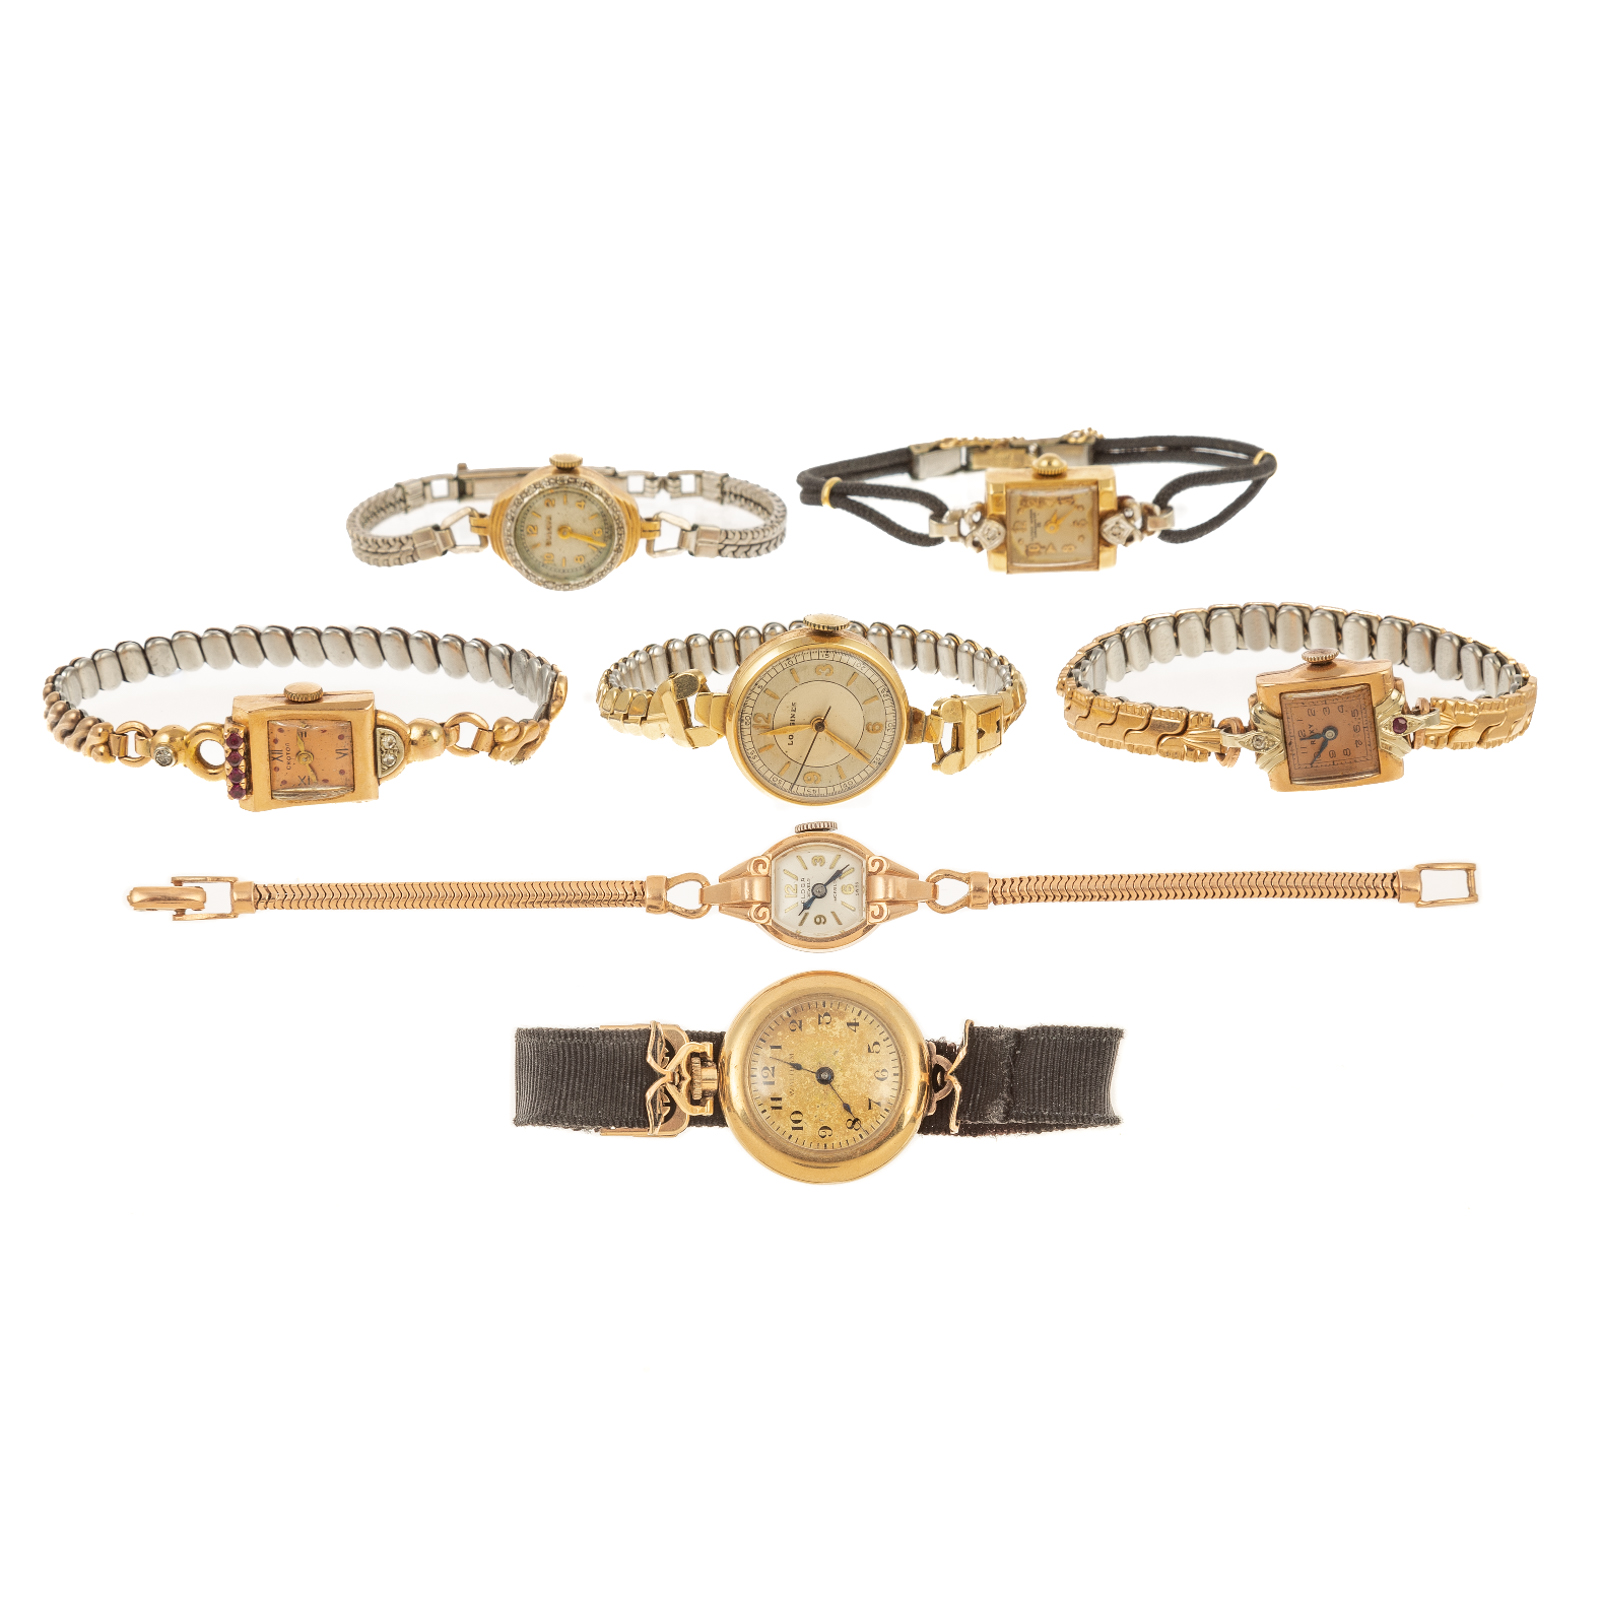 A LARGE COLLECTION OF 14K WRIST 2e9f56